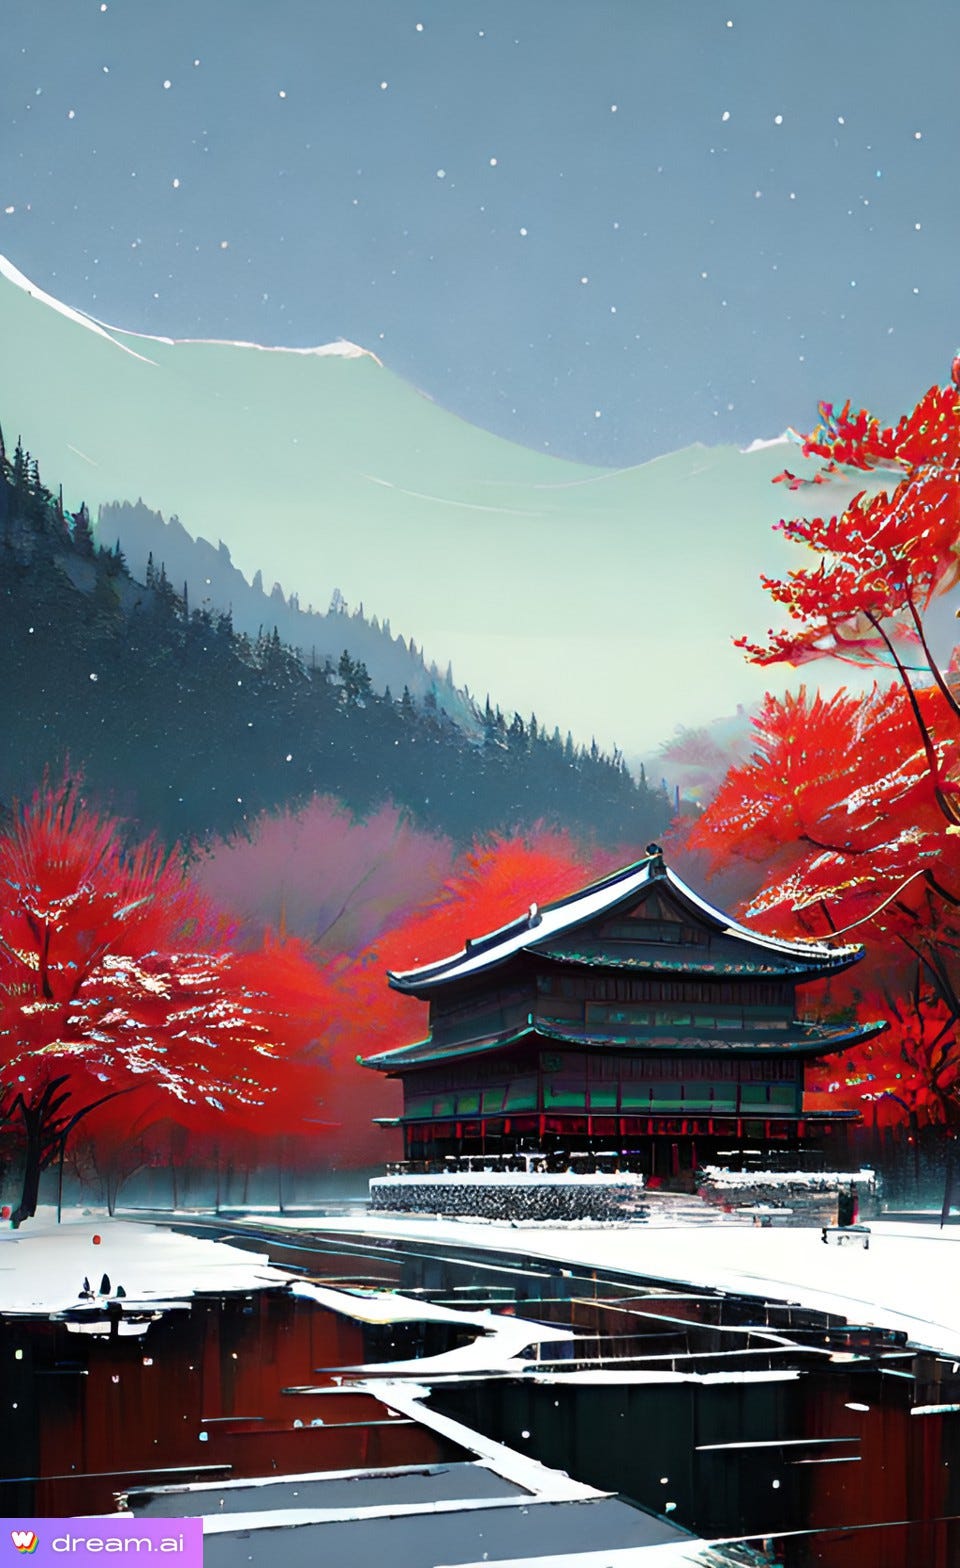 A.I. image of a winter landscape with an Asian style building before mountains, surrounded by trees with red foliage, and melting snow on the ground.